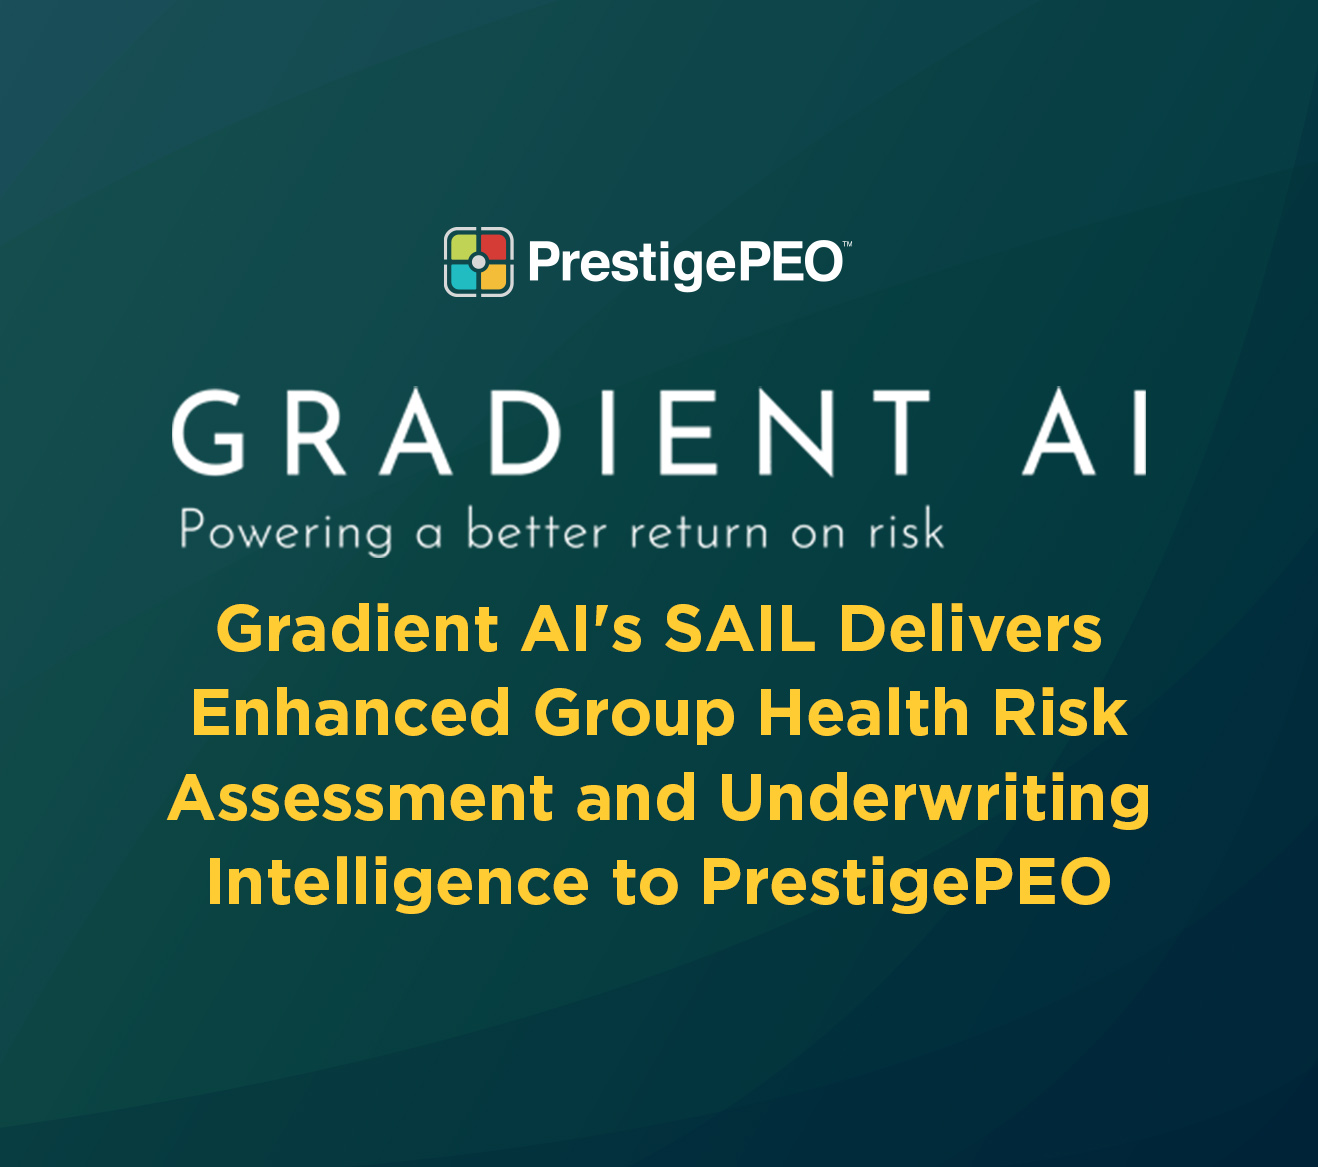 Gradient AI’s SAIL Delivers Enhanced Group Health Risk Assessment and Underwriting Intelligence to PrestigePEO